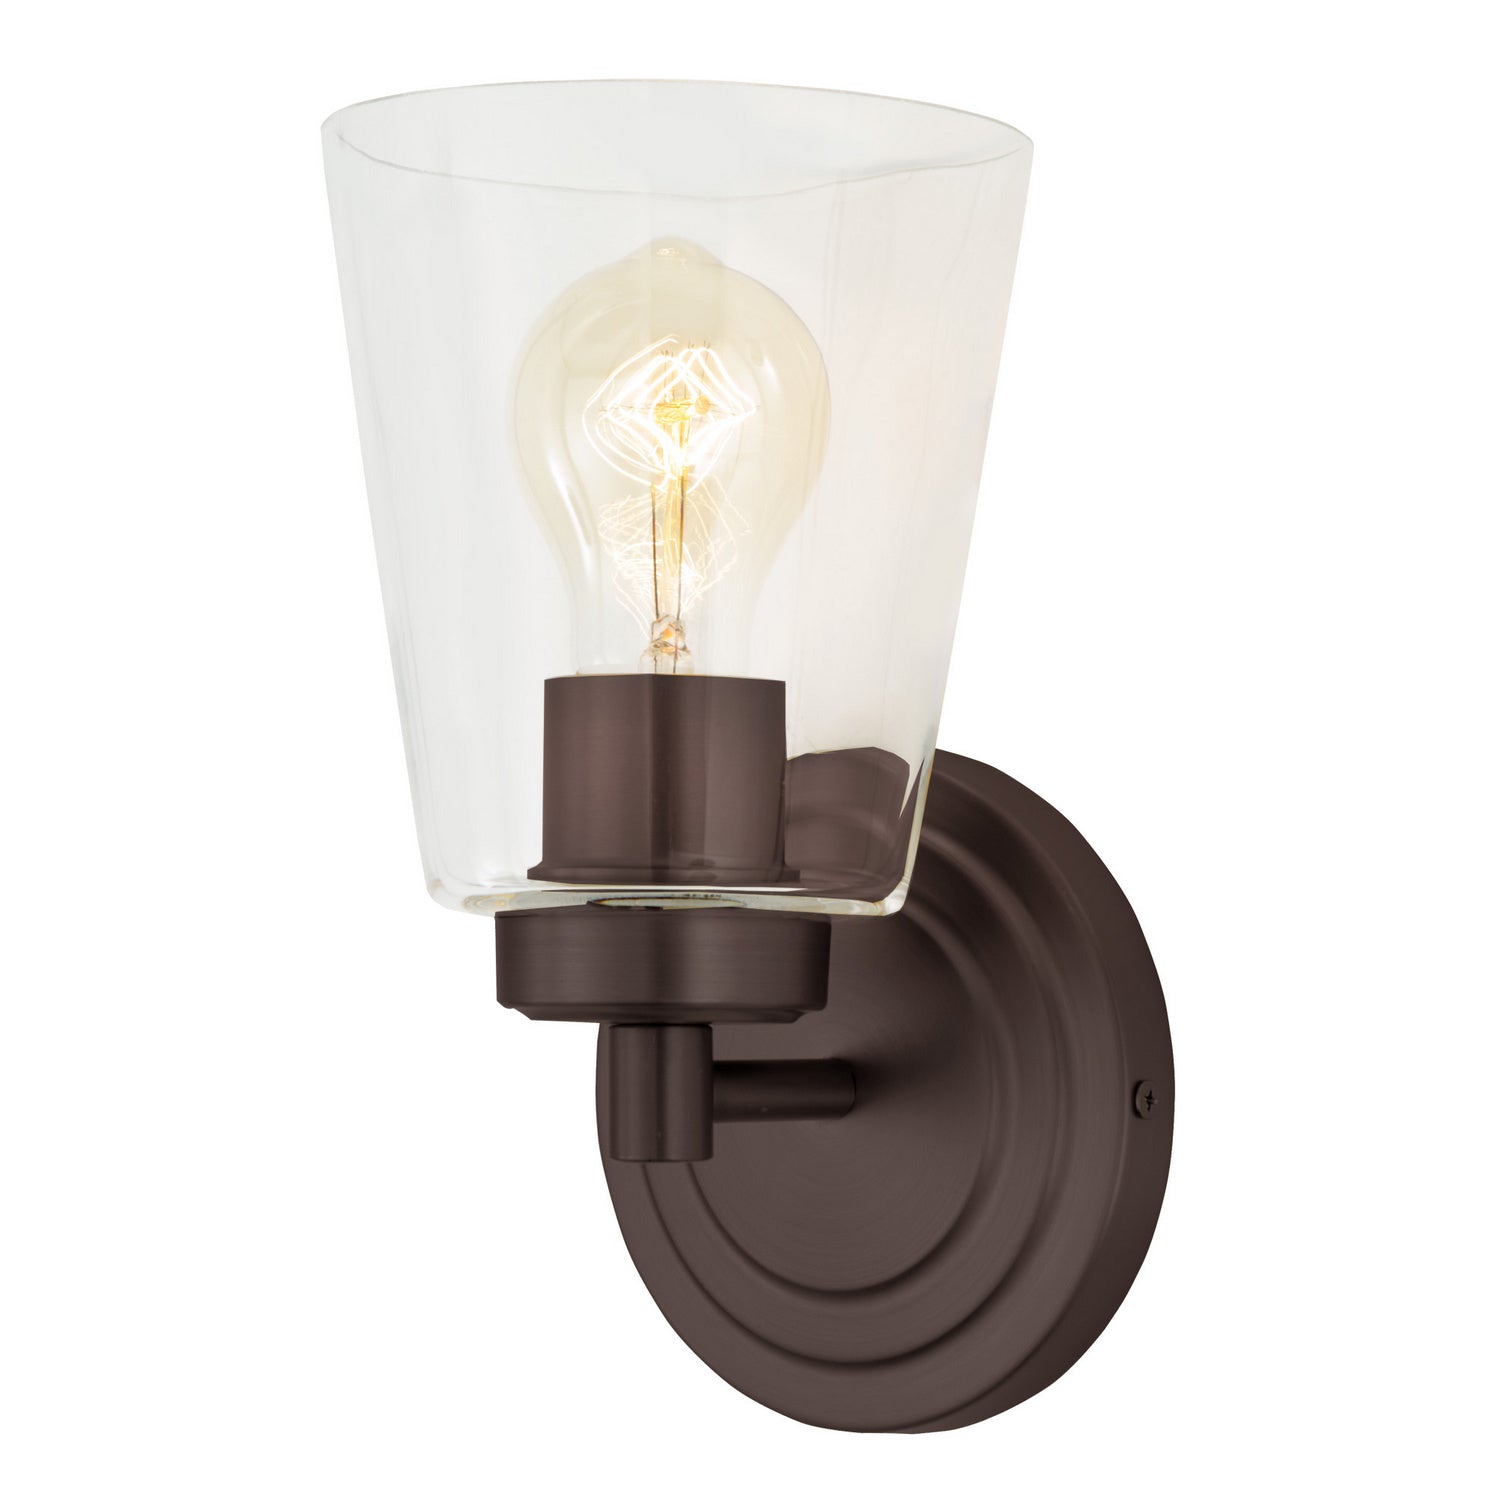 JVI Designs - 461-08 - One Light Wall Sconce - Wilshire - Oil Rubbed Bronze